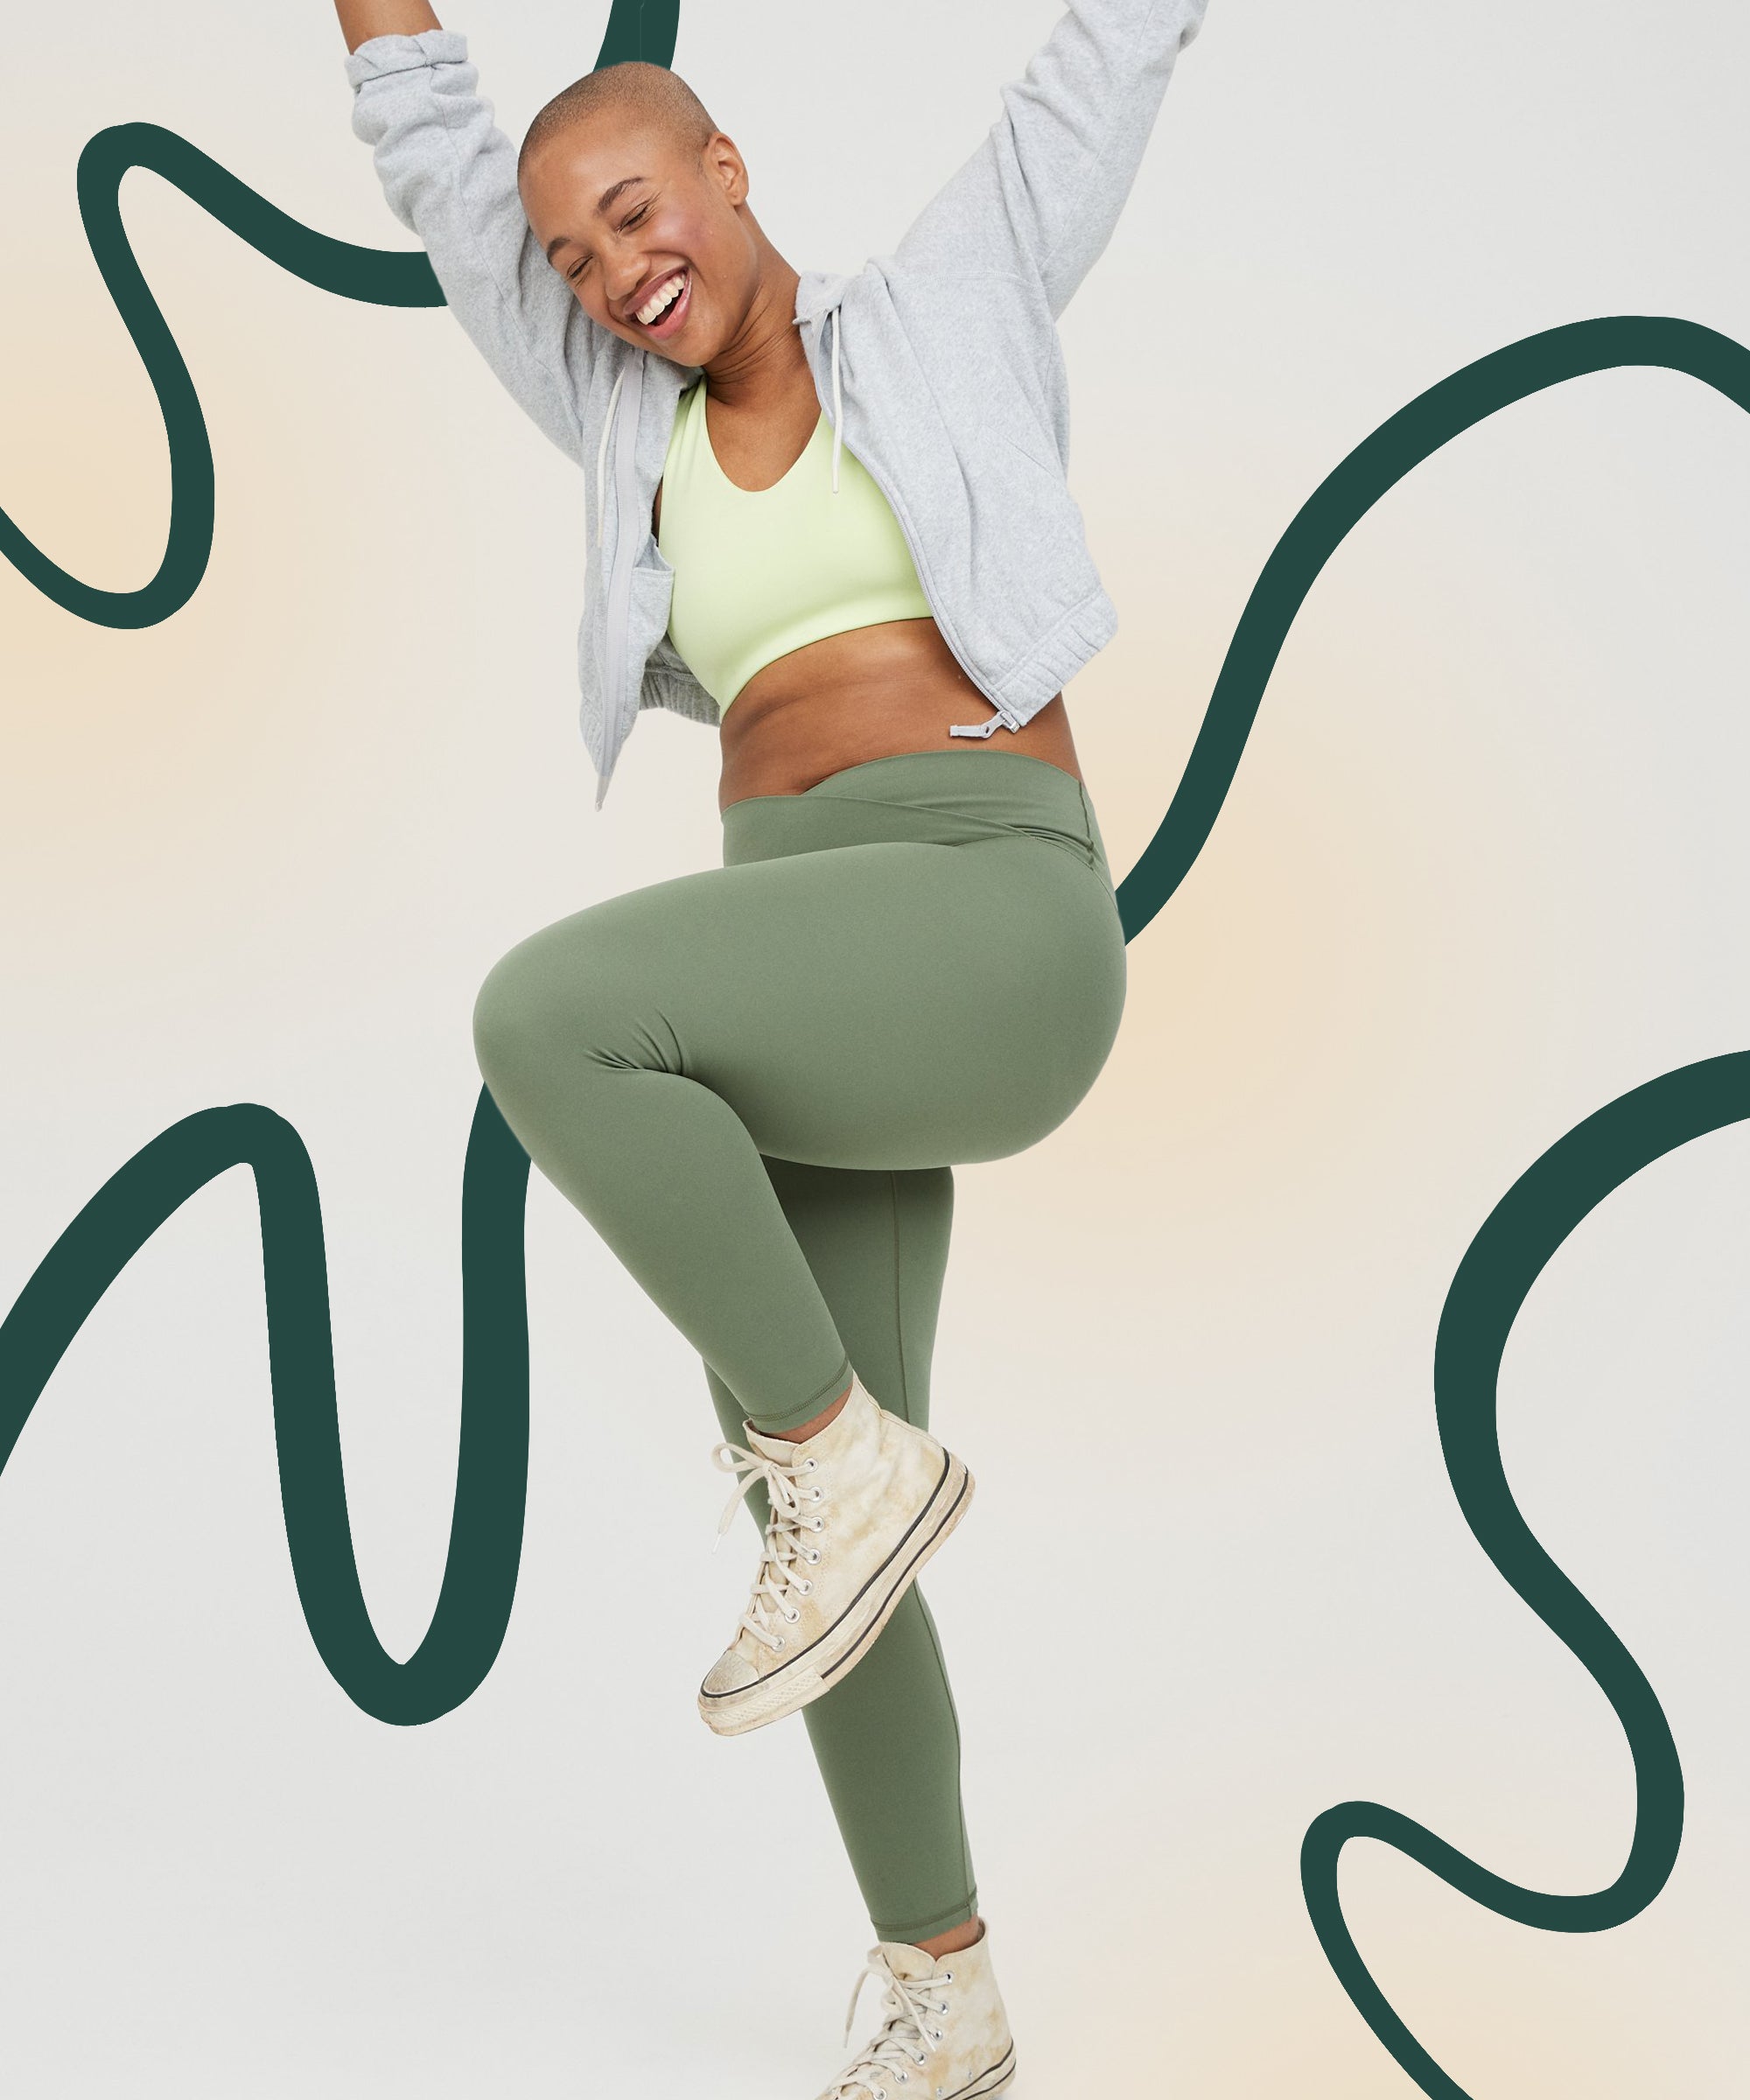 How Aerie Is Using TikTok to Sellout Leggings and Boost Online Sales